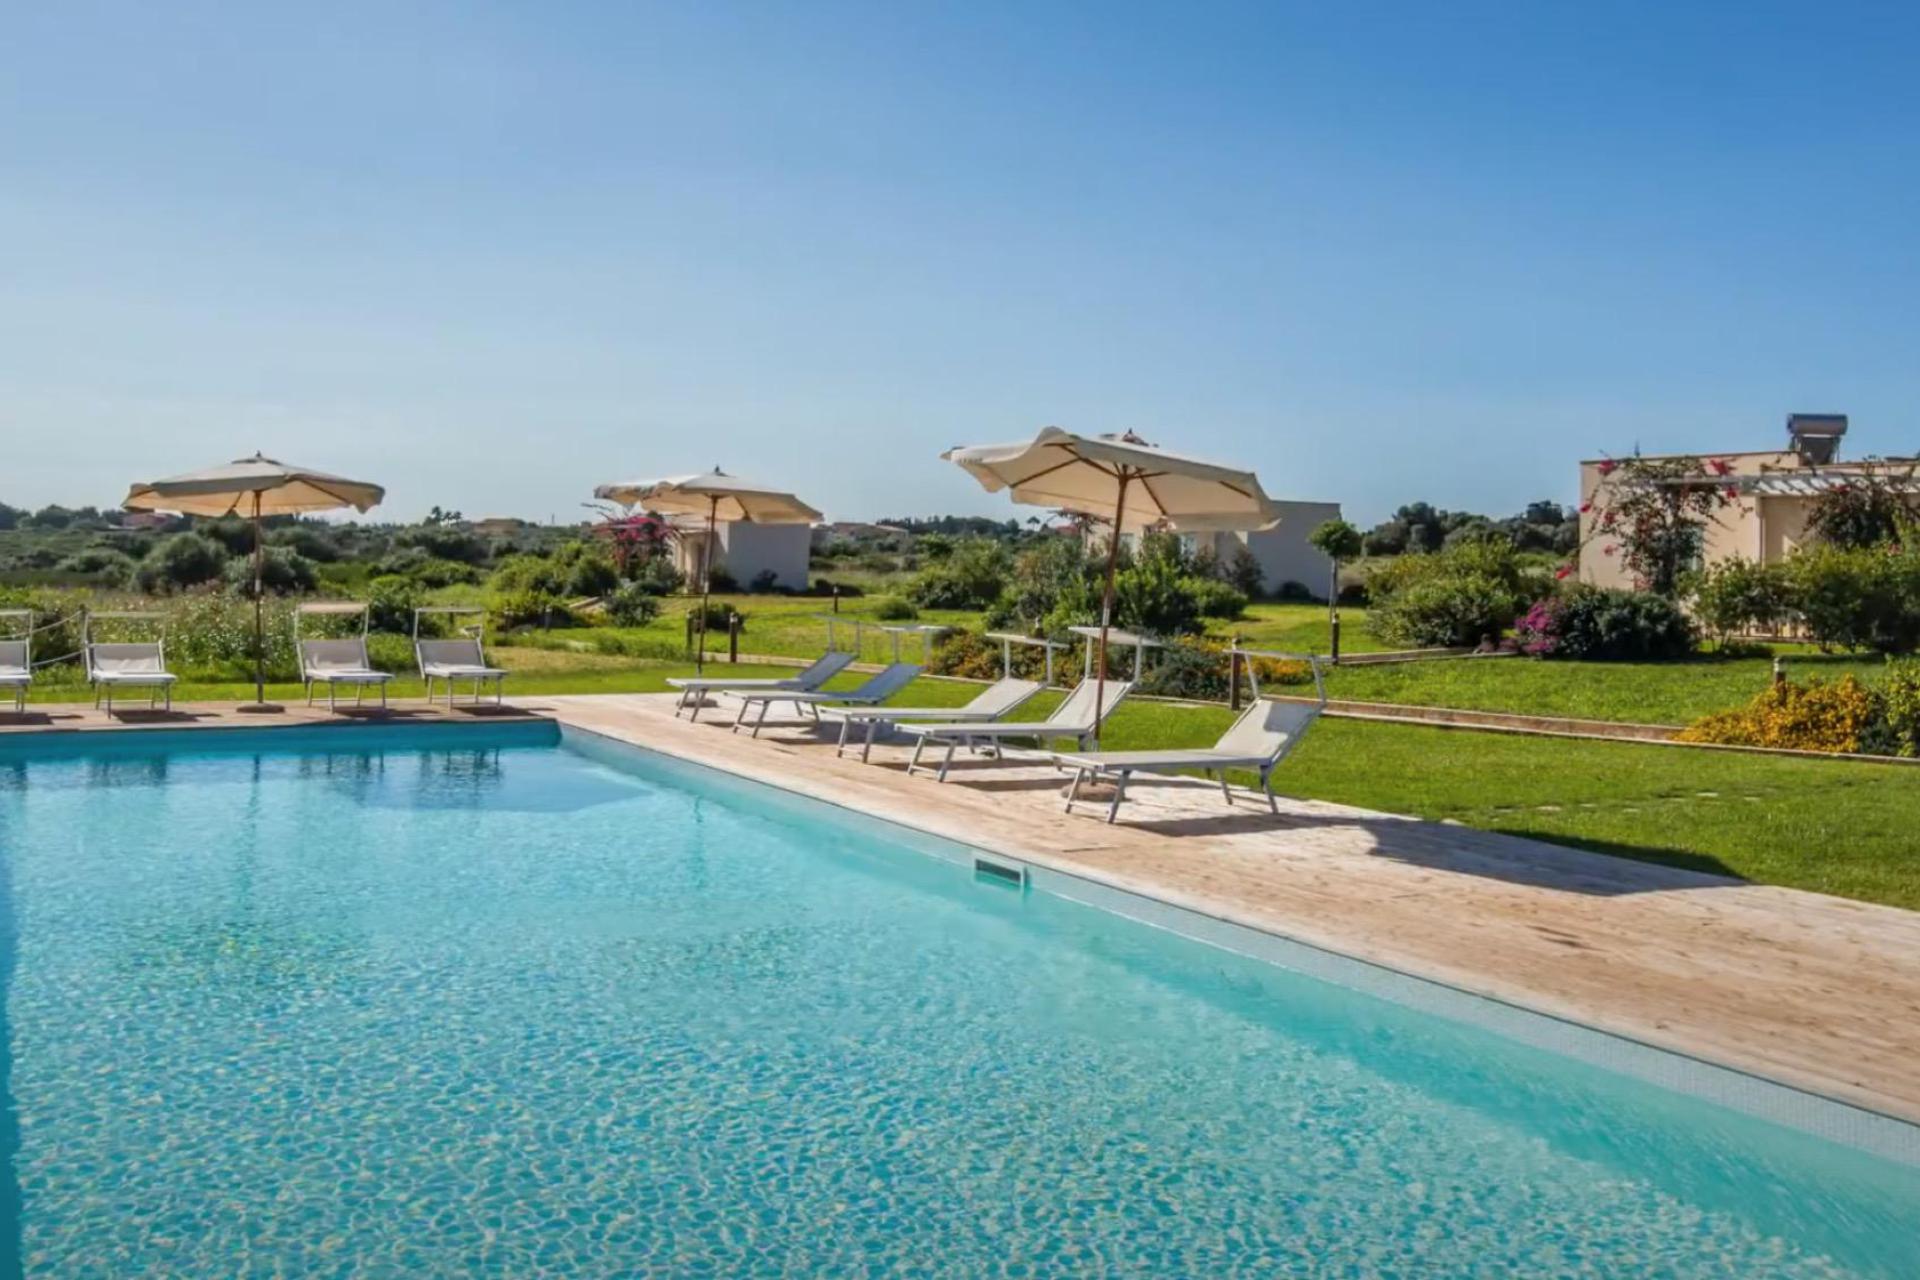 Agriturismo Sicily Cottages in a beautiful spot by the sea near Siracusa